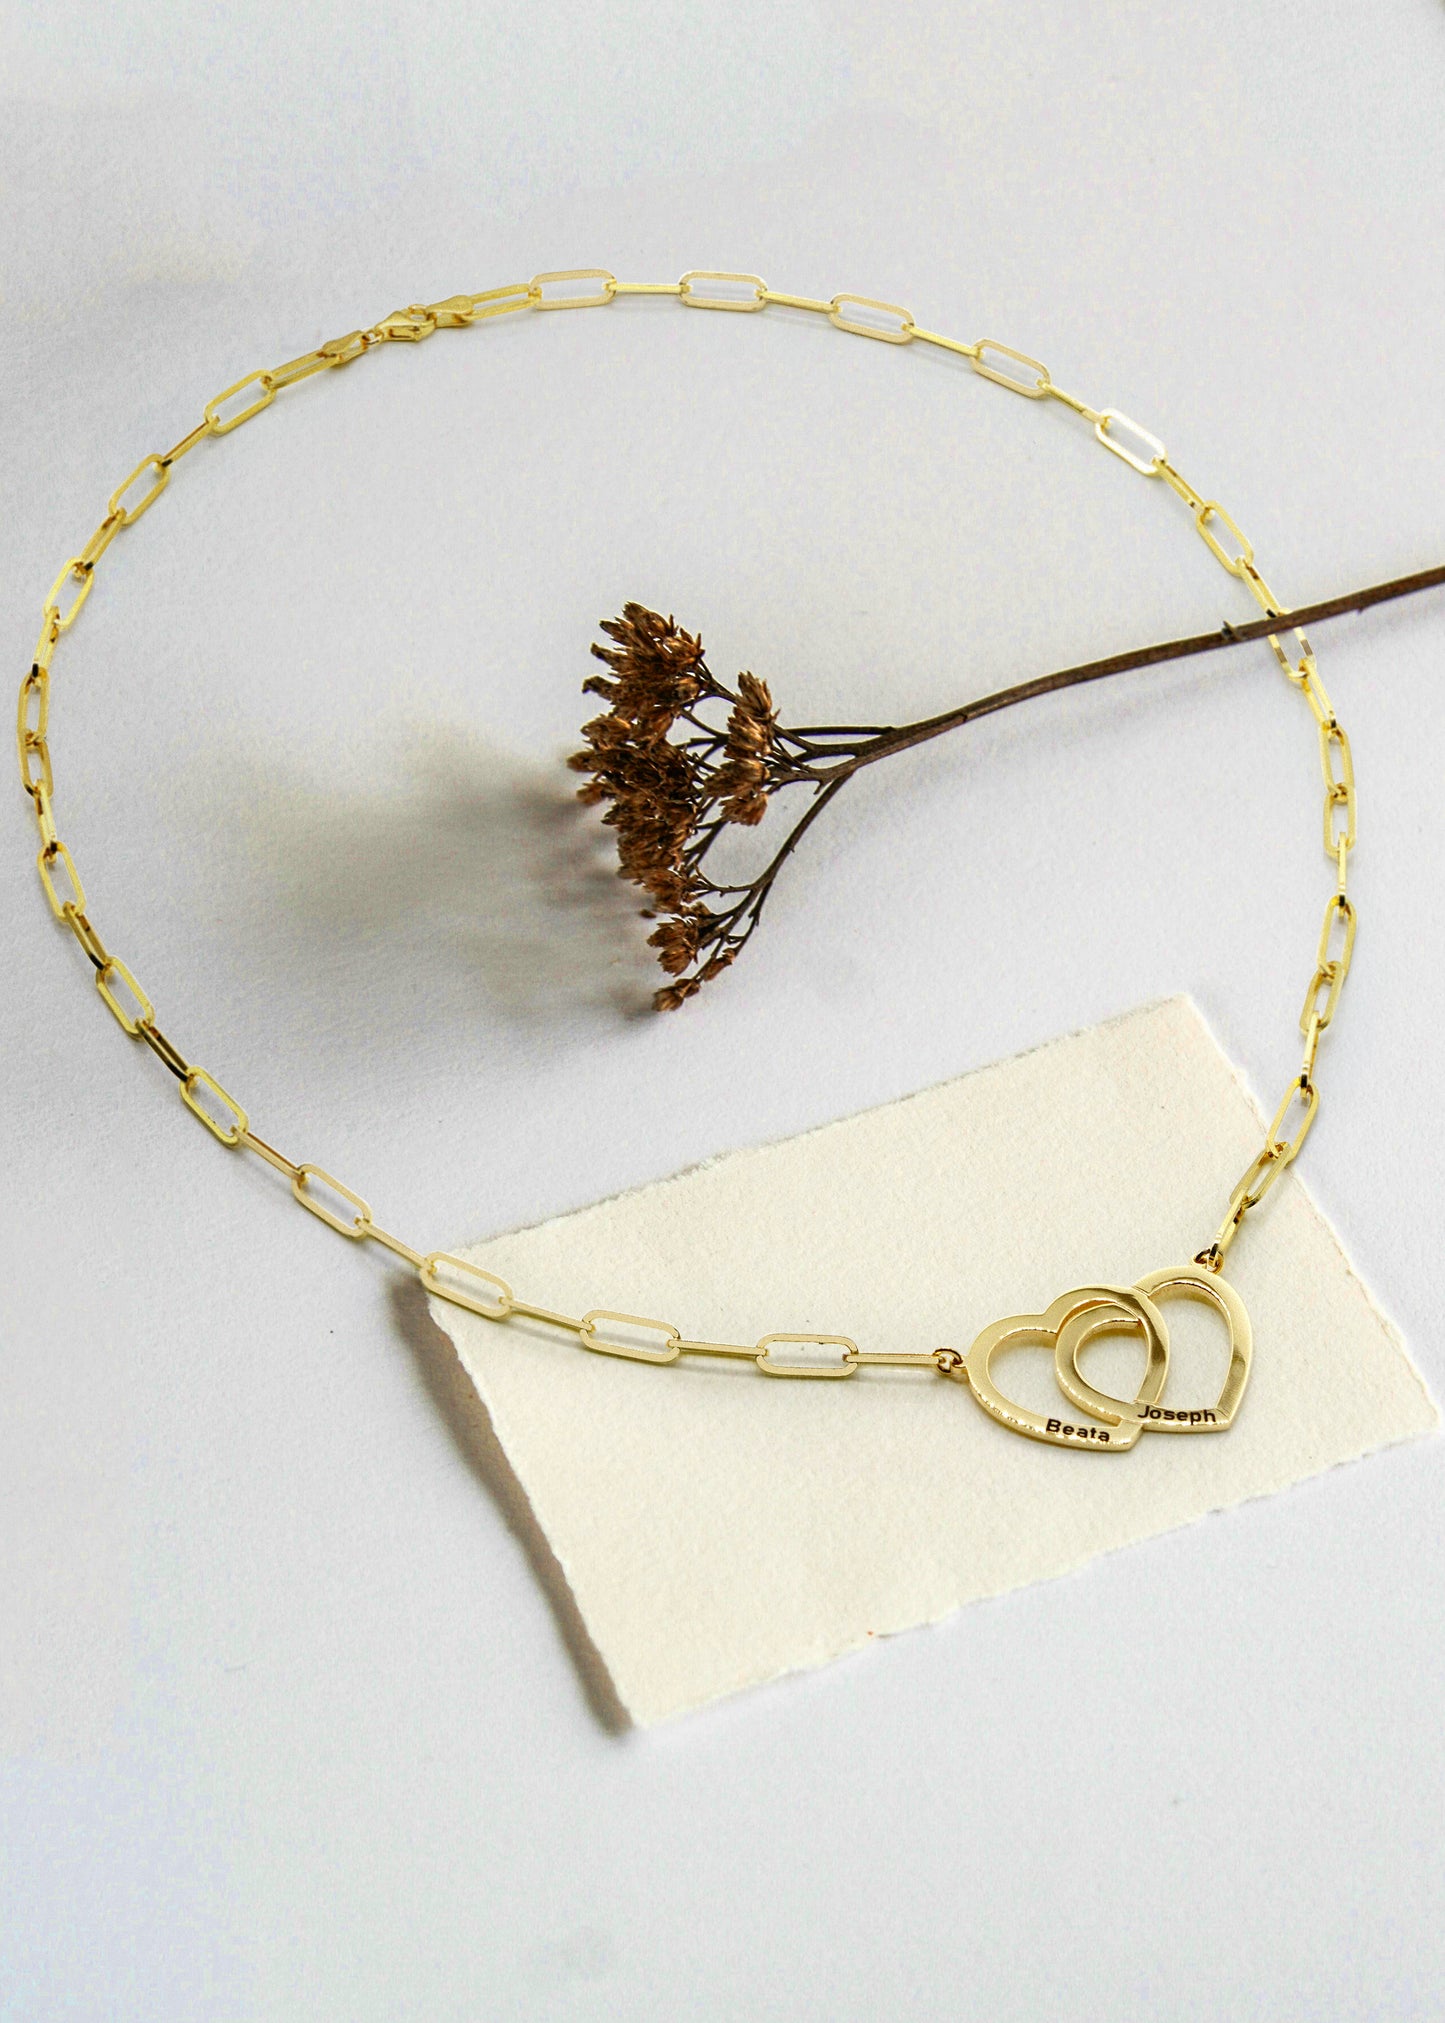 Interlocking Hearts Necklace in 14K Gold Paperclip Chain | Engravable